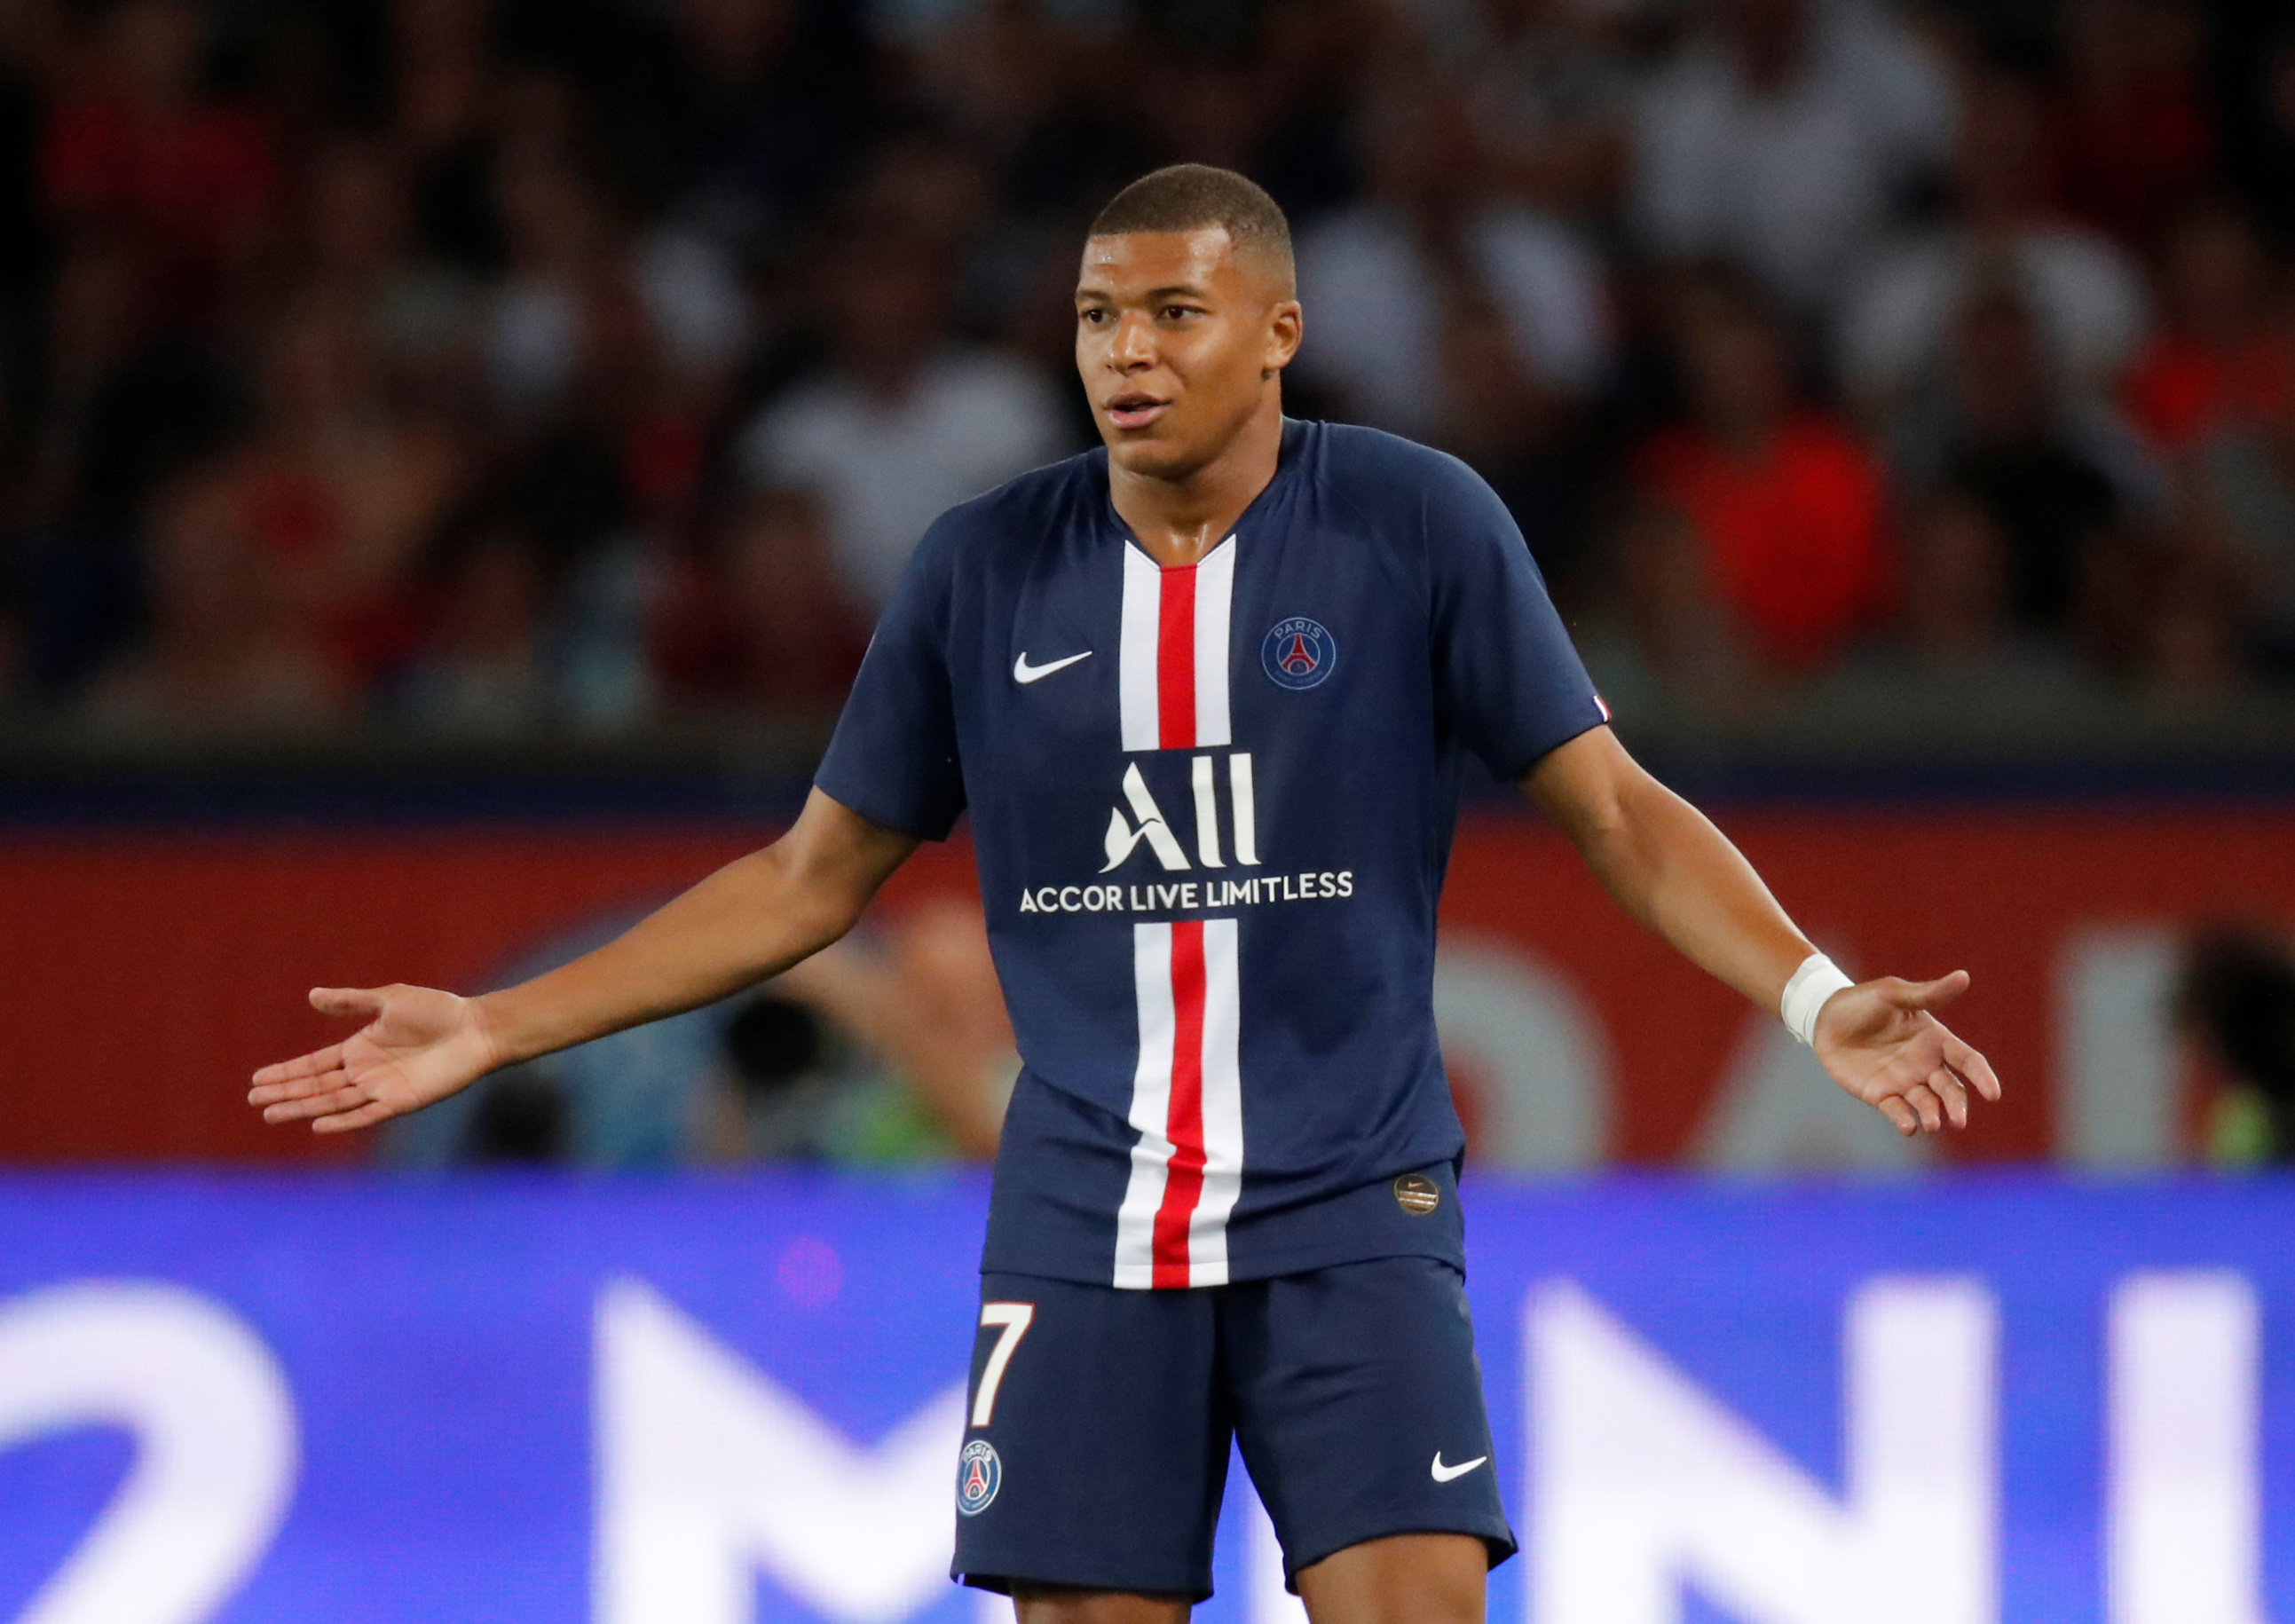 PSG forwards Mbappe, Cavani ruled out of Real Madrid clash